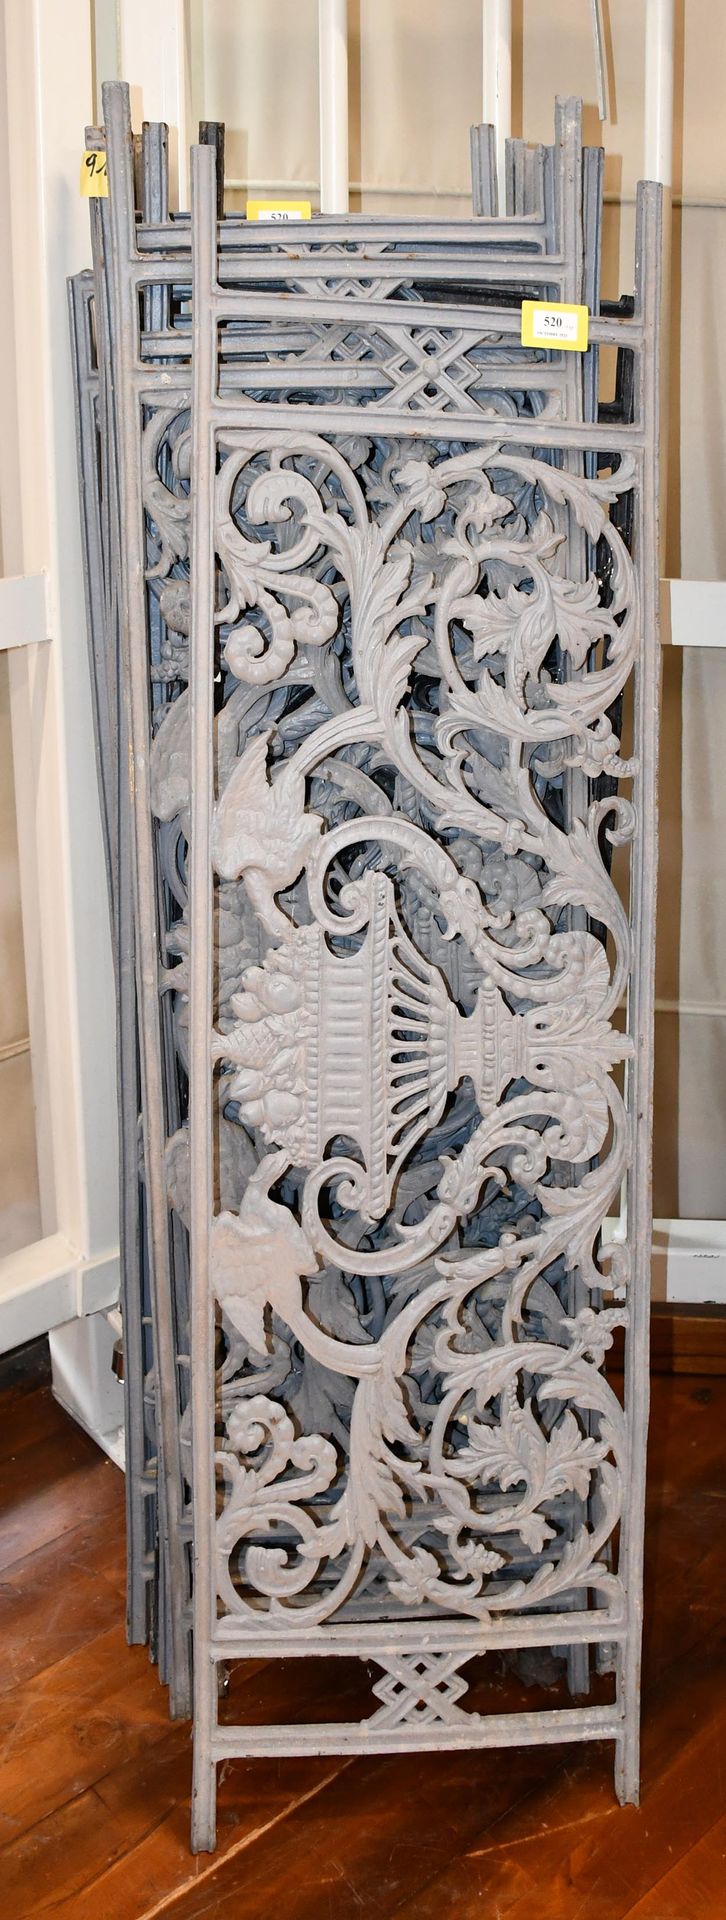 Null Set of eleven openwork cast iron transoms - Dimensions : 40 cm x 130 cm